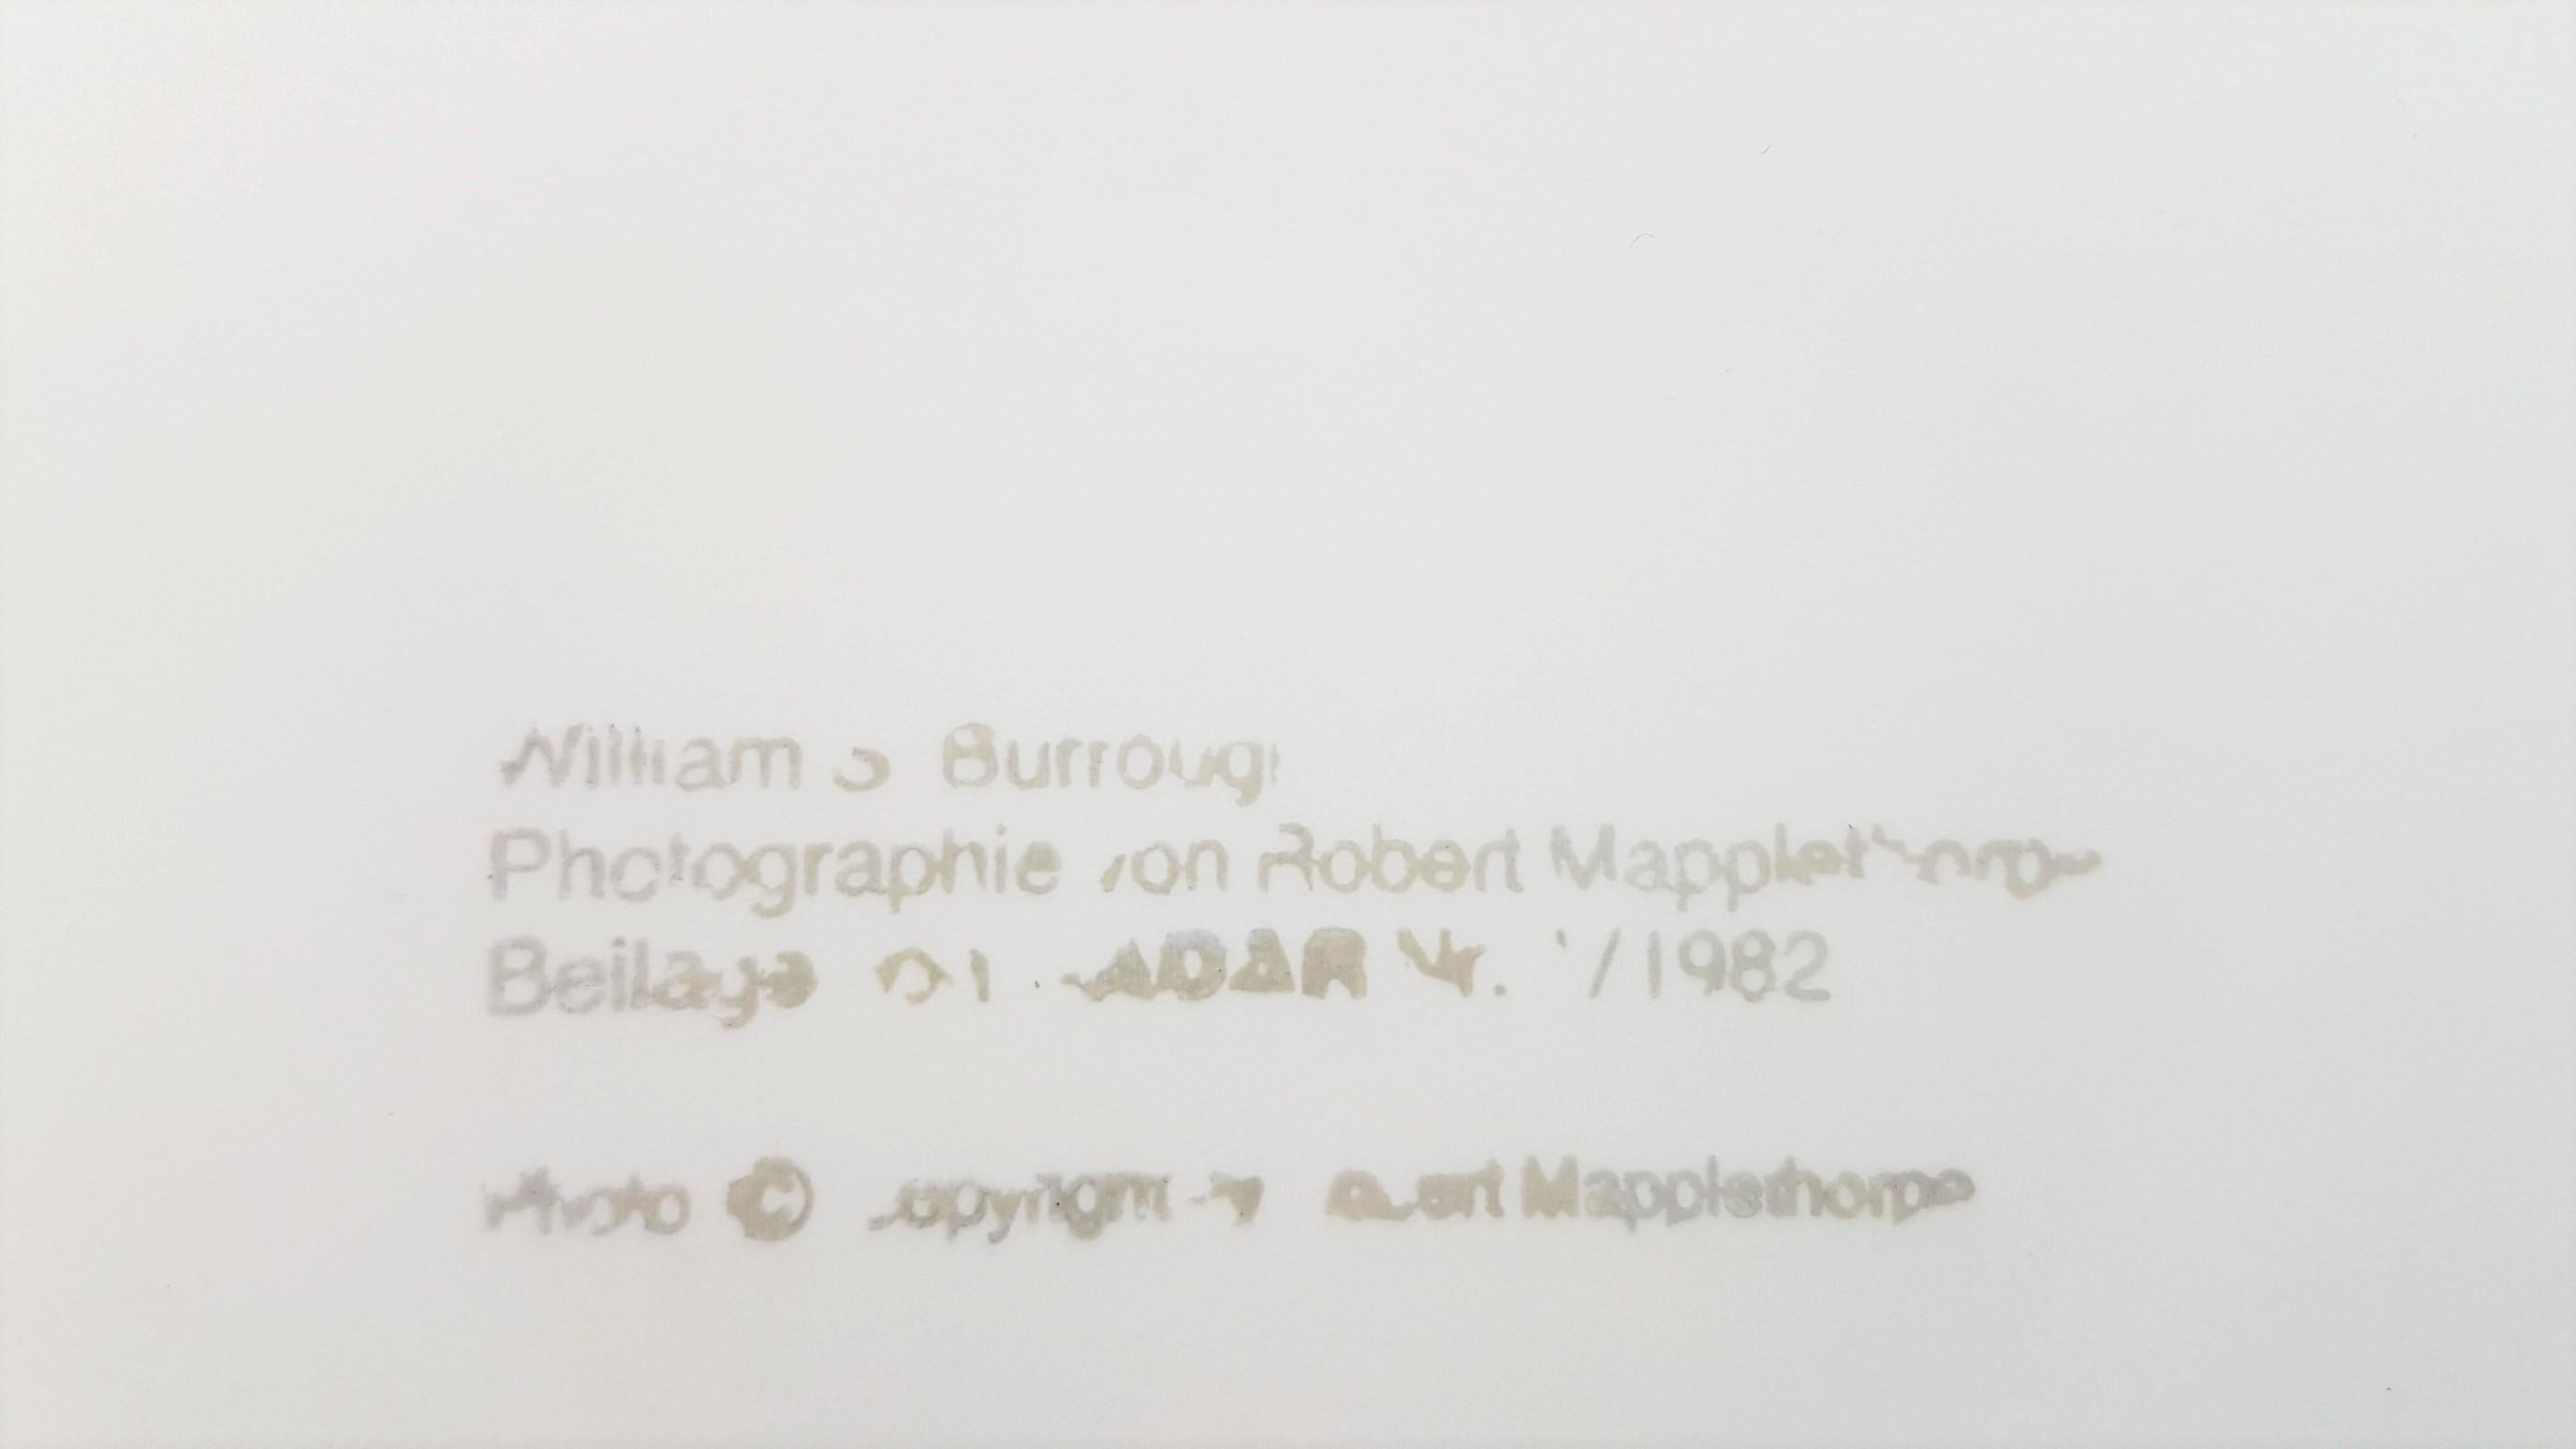 FLASH SALE until 8/8/21

Robert Mapplethorpe
William S. Burroughs
Photograph
Year: 1982
Size: 9.8 × 7.8 inches 
Stamped verso
Gallery COA provided

Robert Mapplethorpe was born November 4, 1946, in Floral Park, New York. He left home in 1962 and